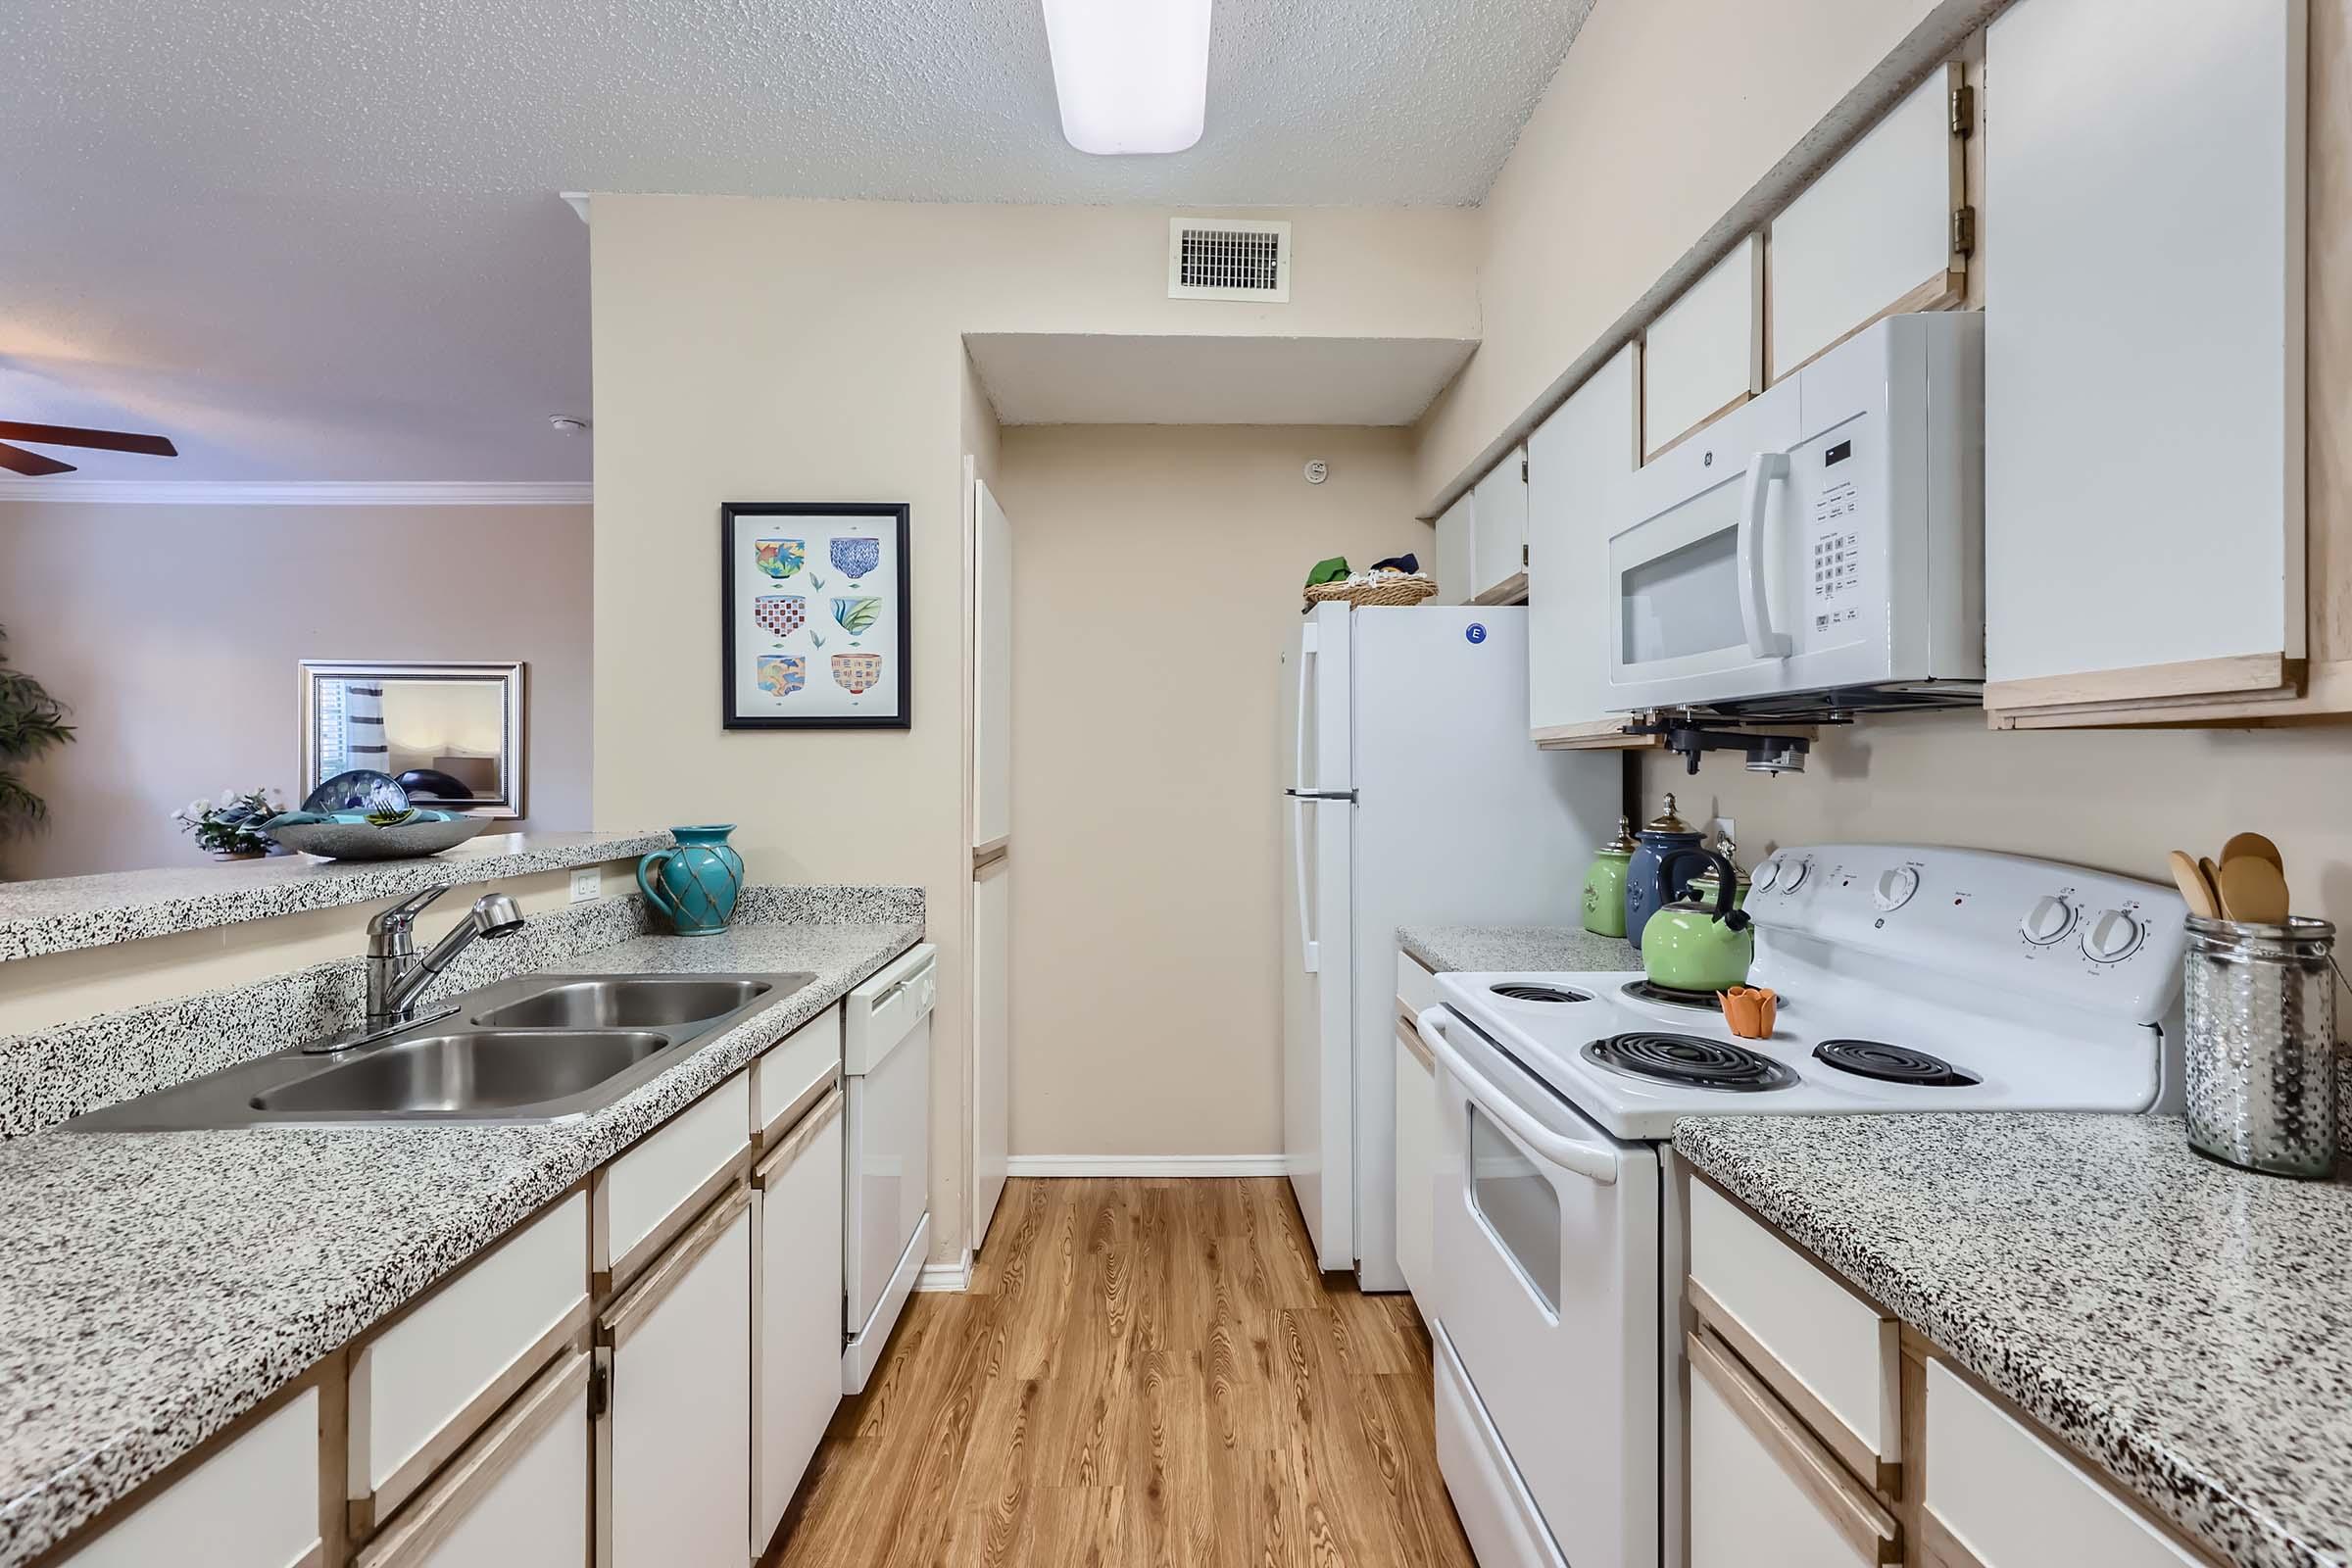 Rise Skyline apartment kitchen with white cabinets and white appliances. 